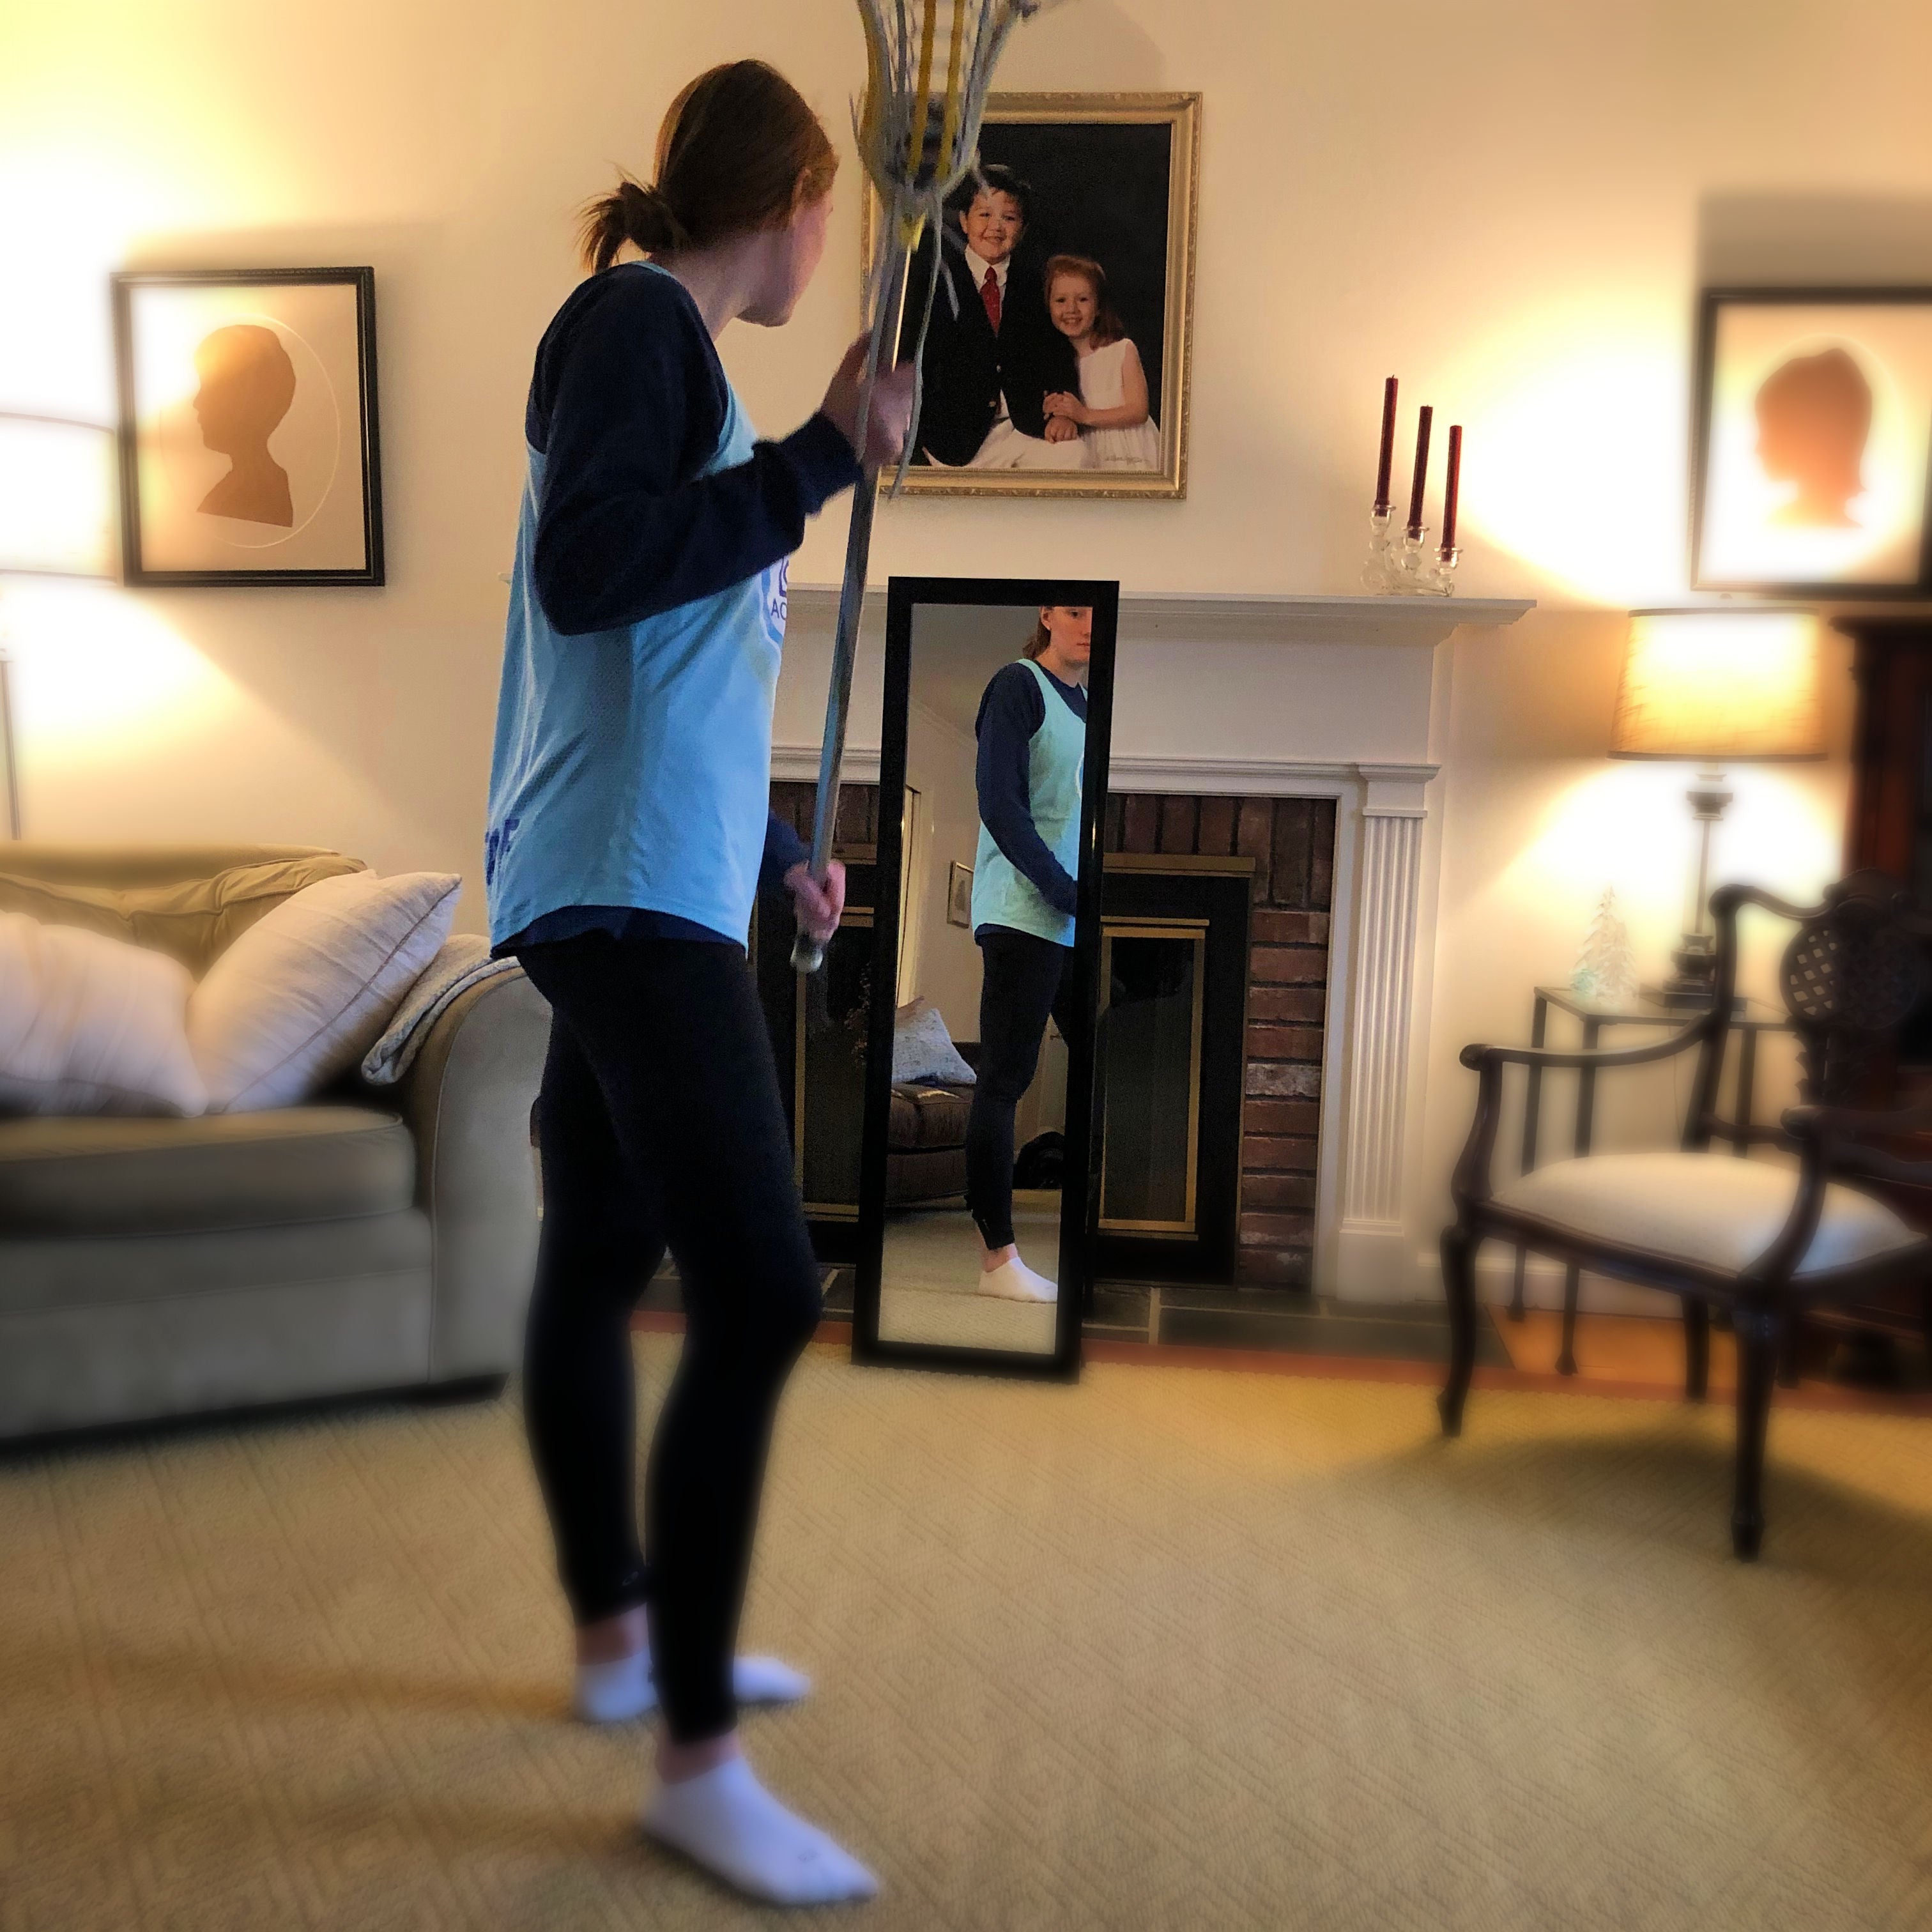 Coach Liza practices the Mirror lacrosse drill at home